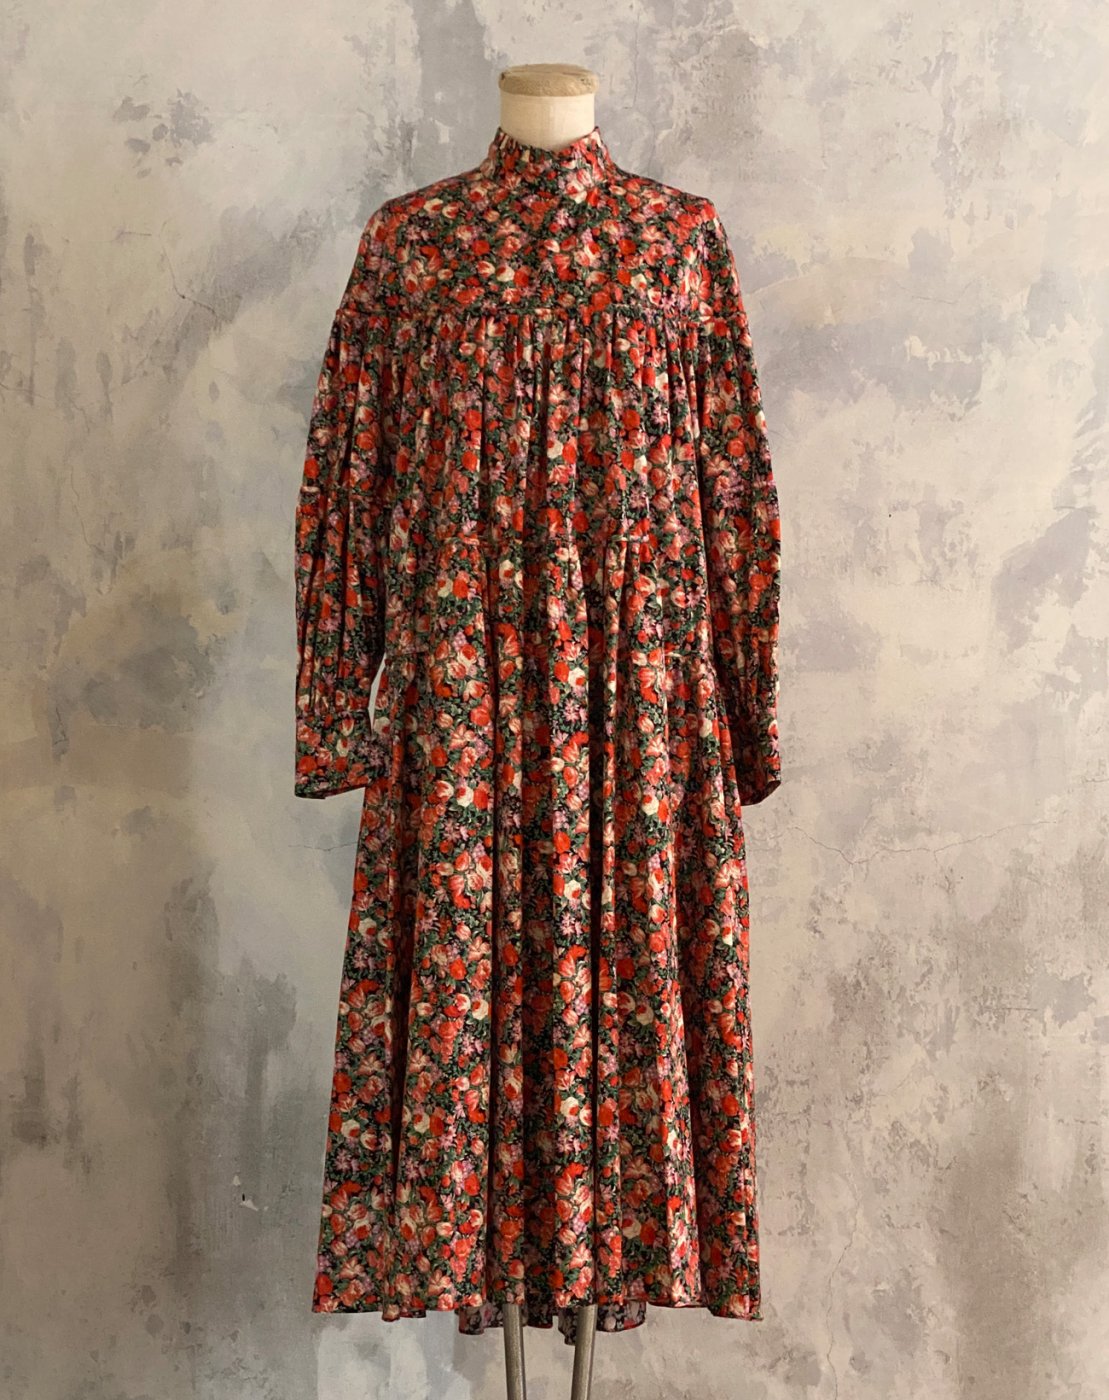 leur logette - <img class='new_mark_img1' src='https://img.shop-pro.jp/img/new/icons2.gif' style='border:none;display:inline;margin:0px;padding:0px;width:auto;' />Matisse Flower Print Dress - Red